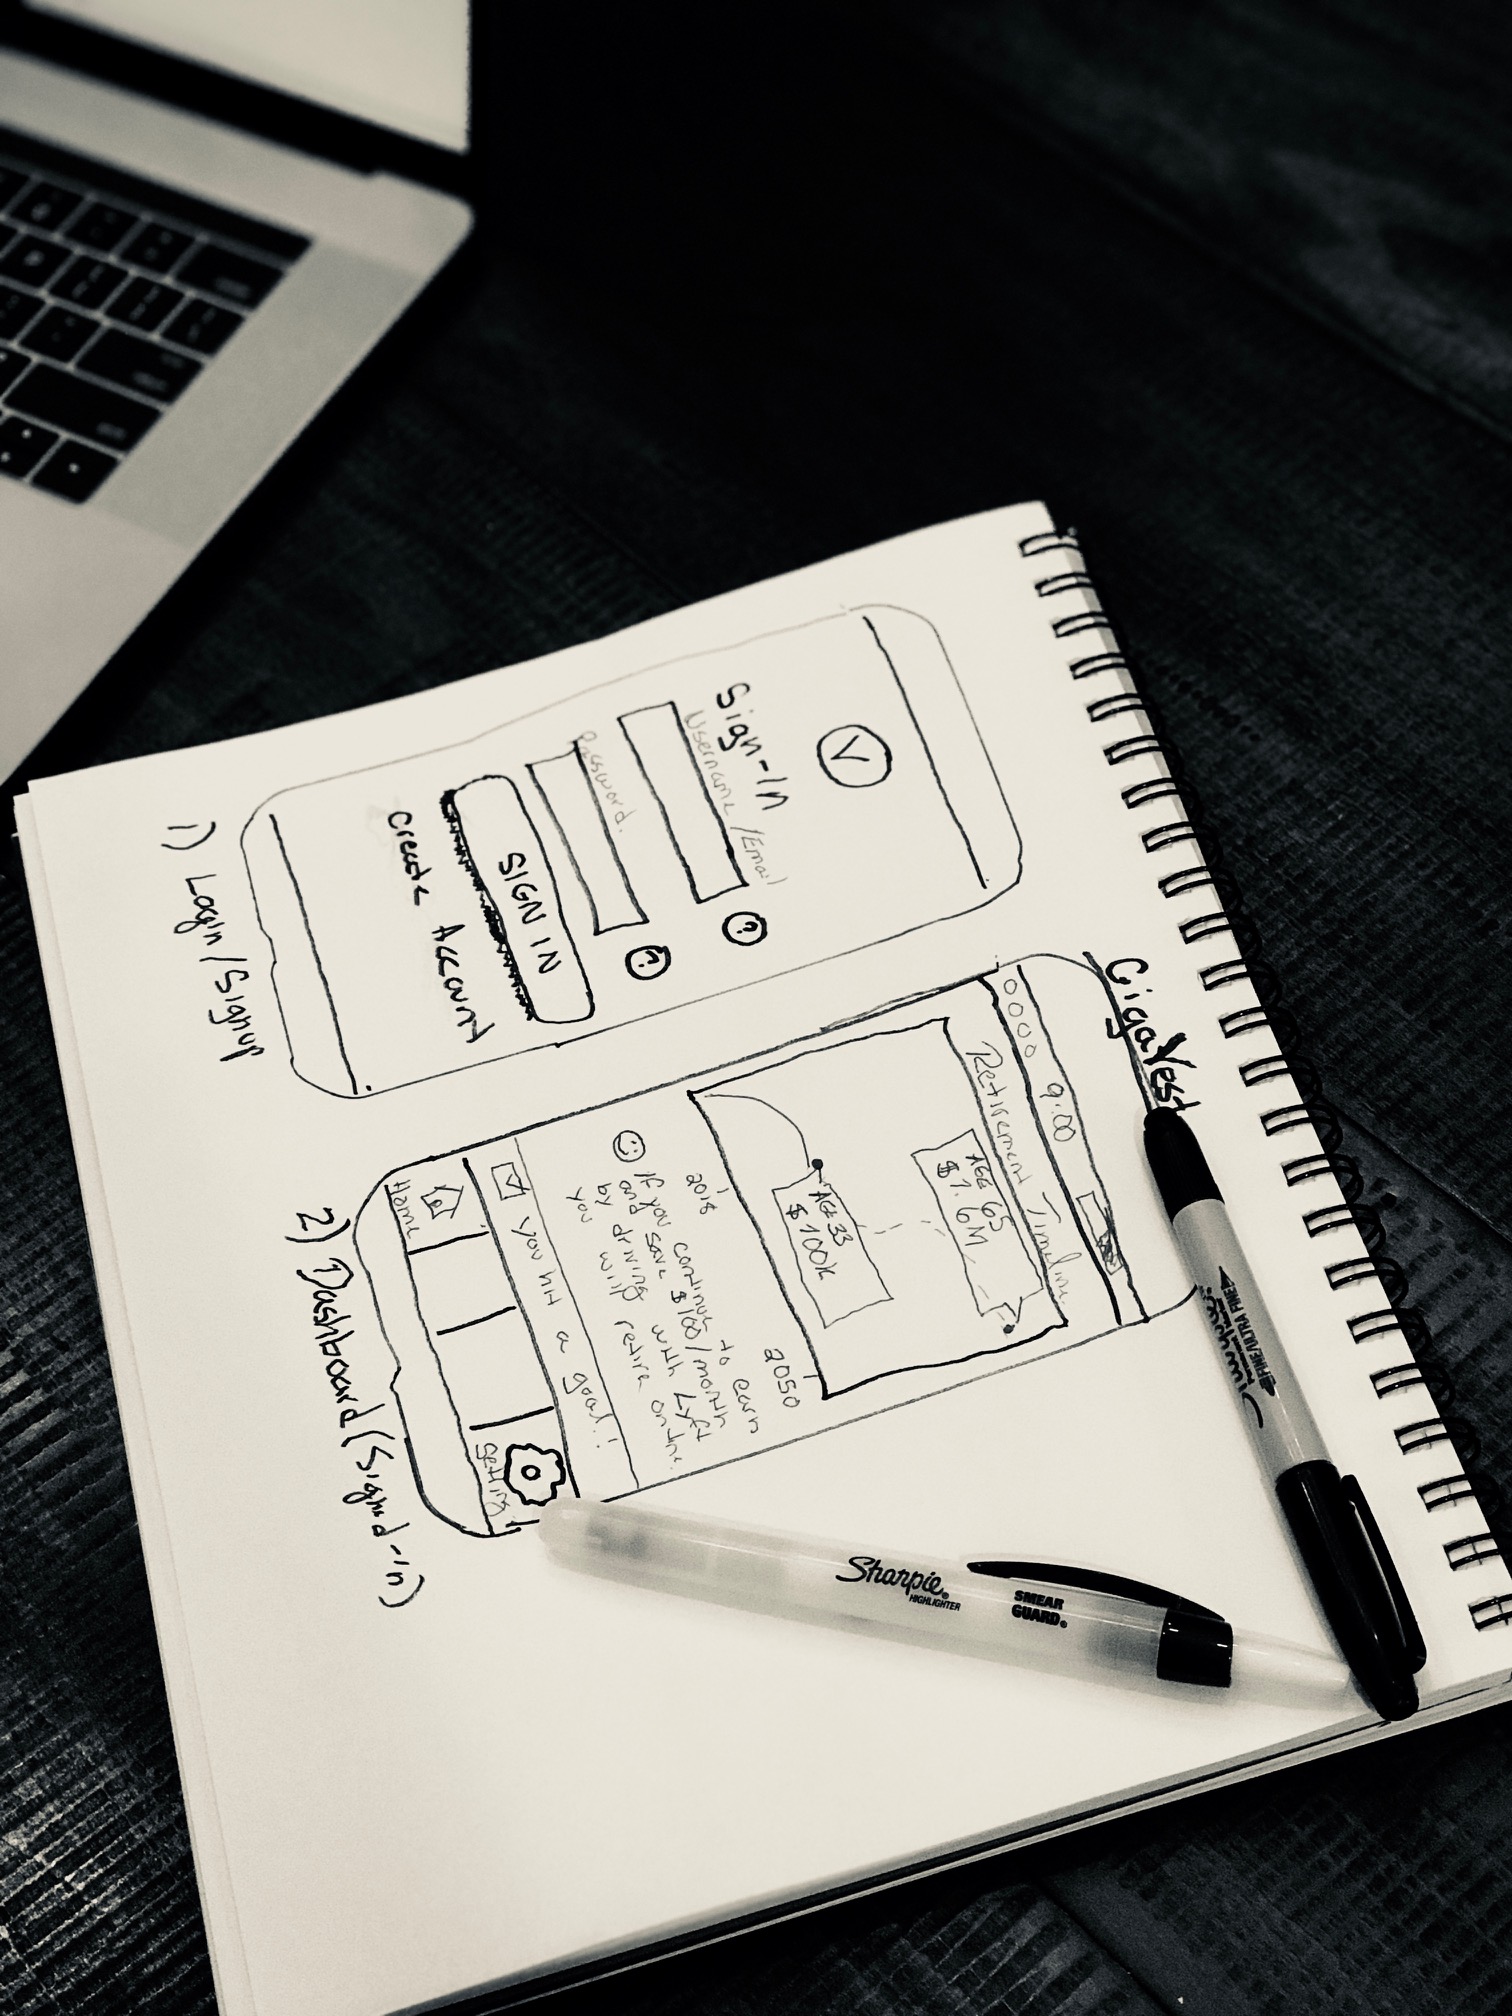 Sketch of Investment app interface